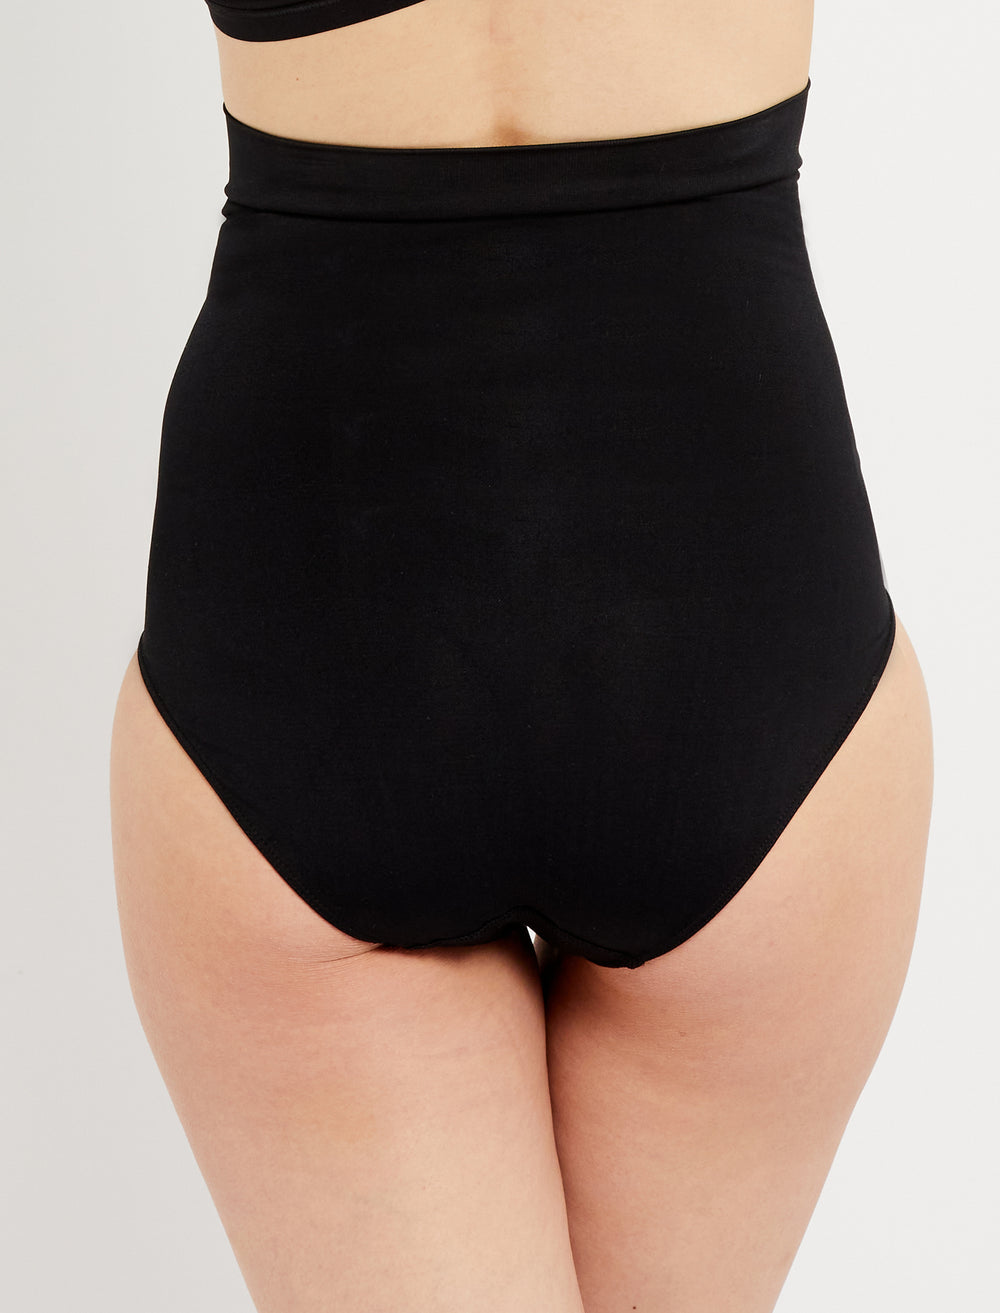 C-Panty High Waist C-Section Recovery Underwear in Black by UpSpring